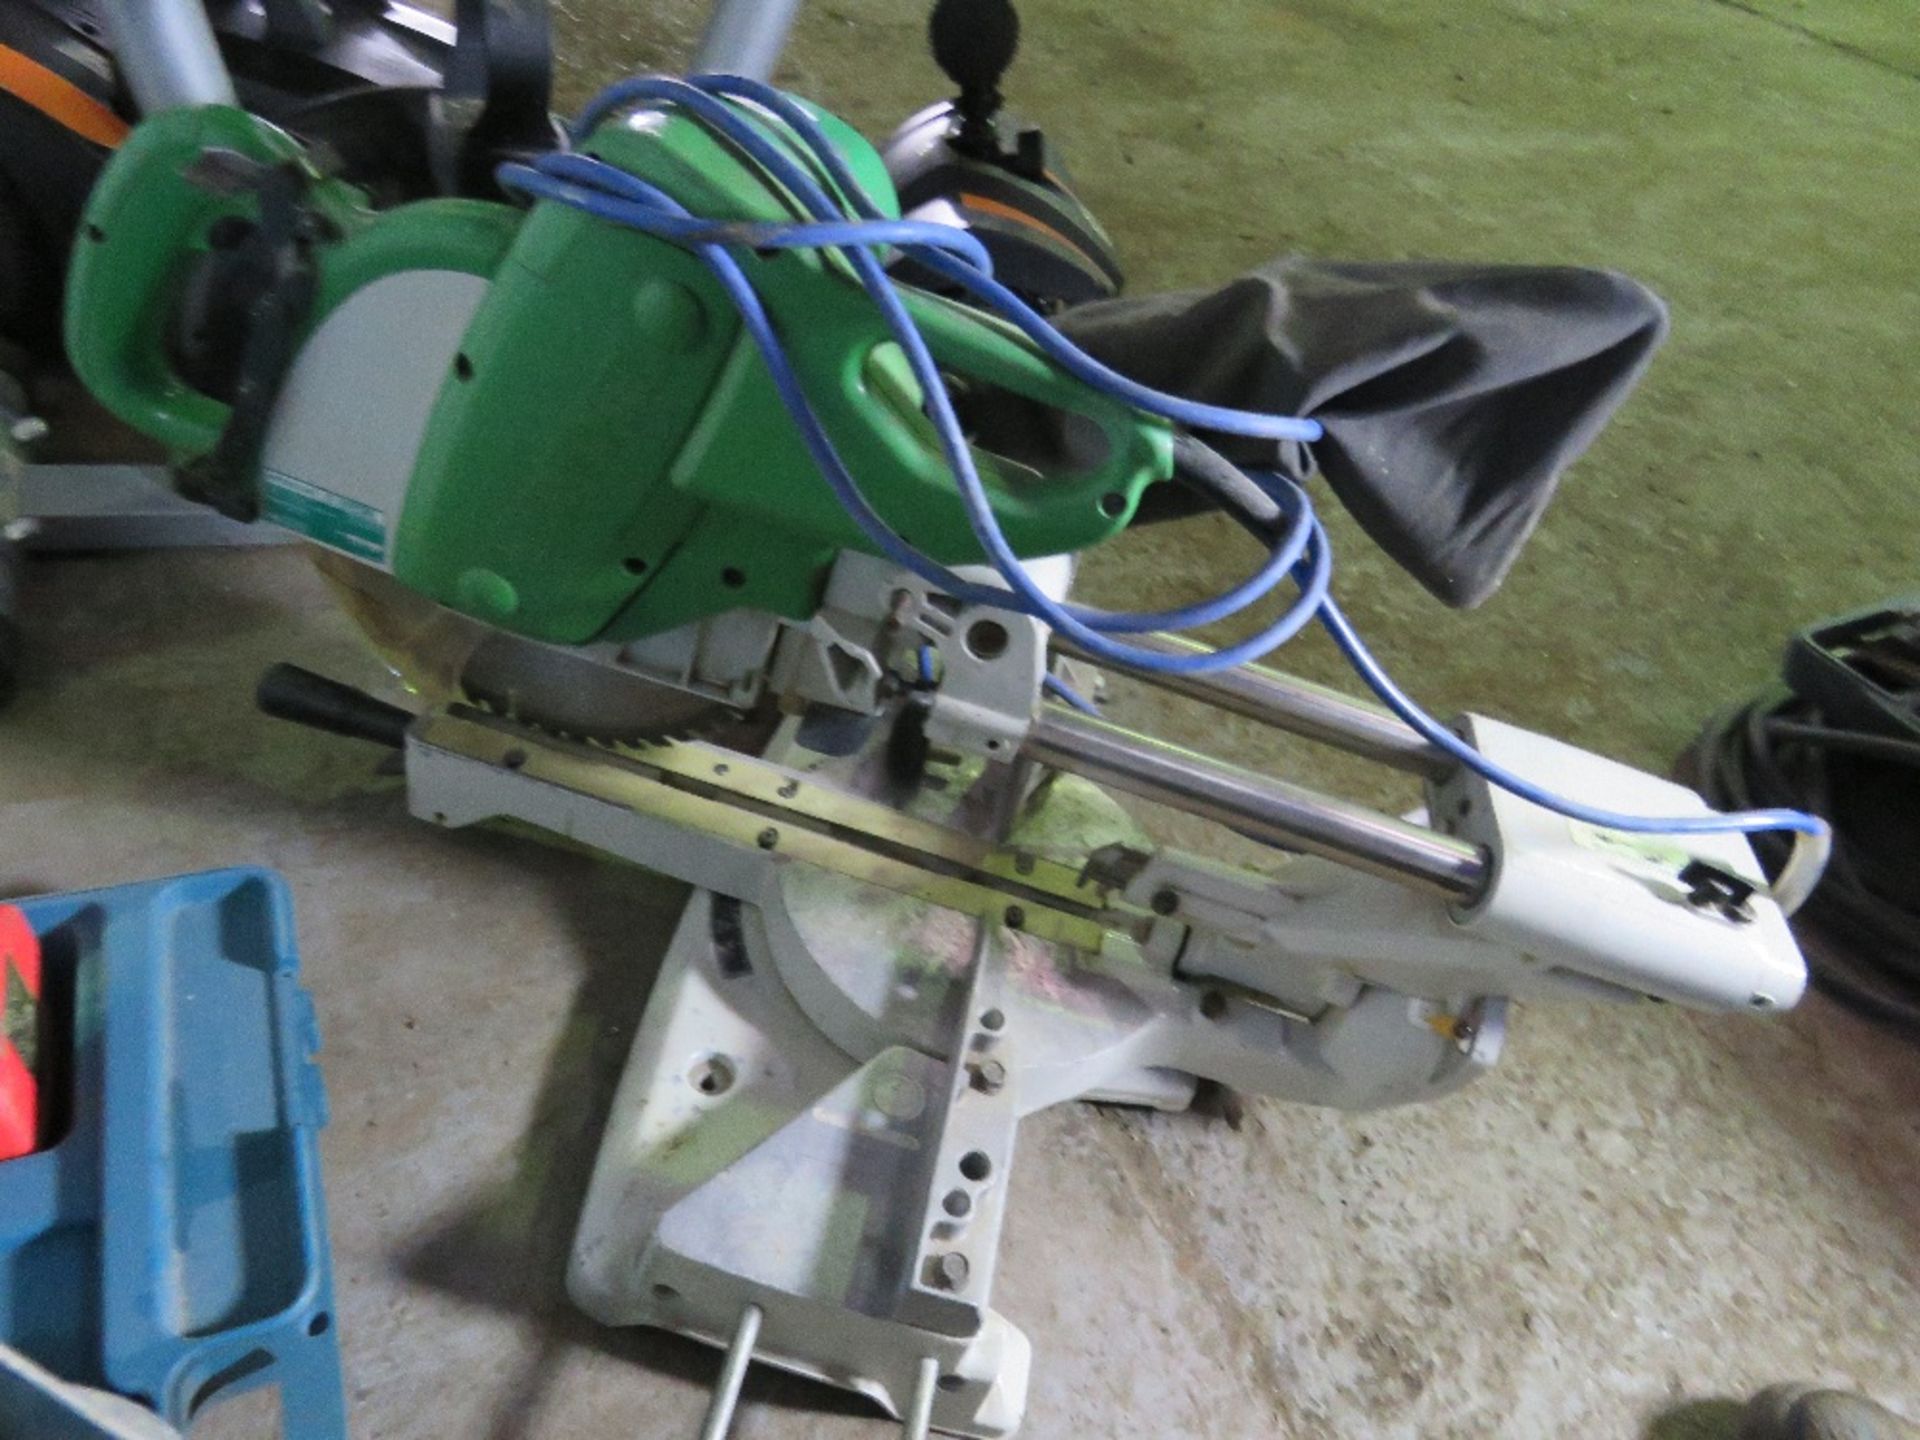 HITACHI 240VOLT MITRE SAW. RETIREMENT SALE. SOLD UNDER THE AUCTIONEERS MARGIN SCHEME THEREFORE NO VA - Image 3 of 3